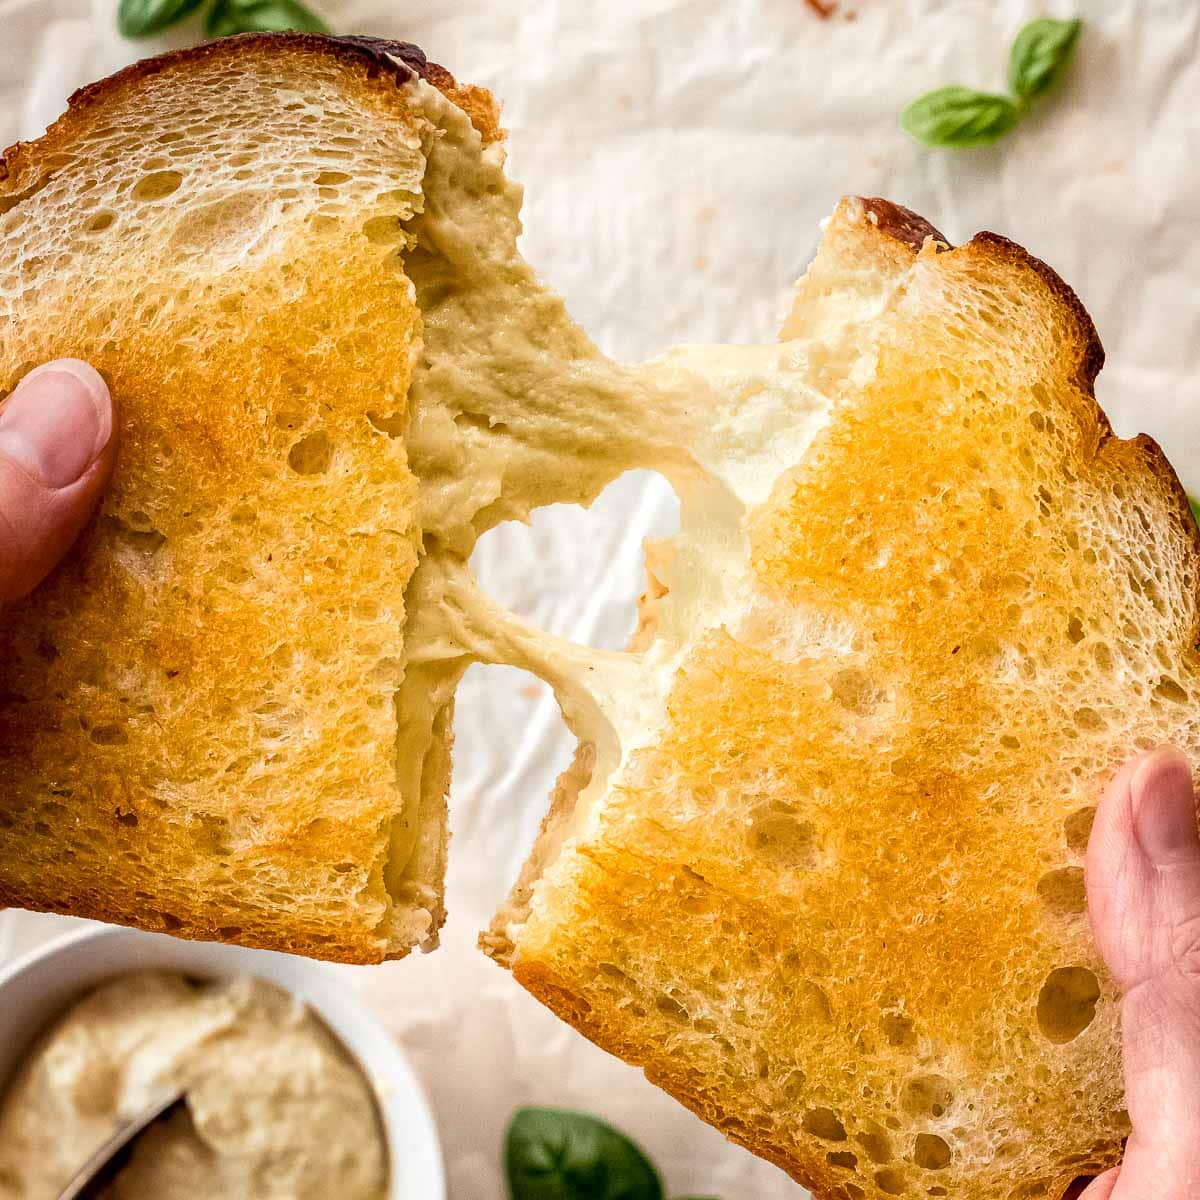 Hands pulling apart a grilled cheese sandwich filled with vegan mozzarella.